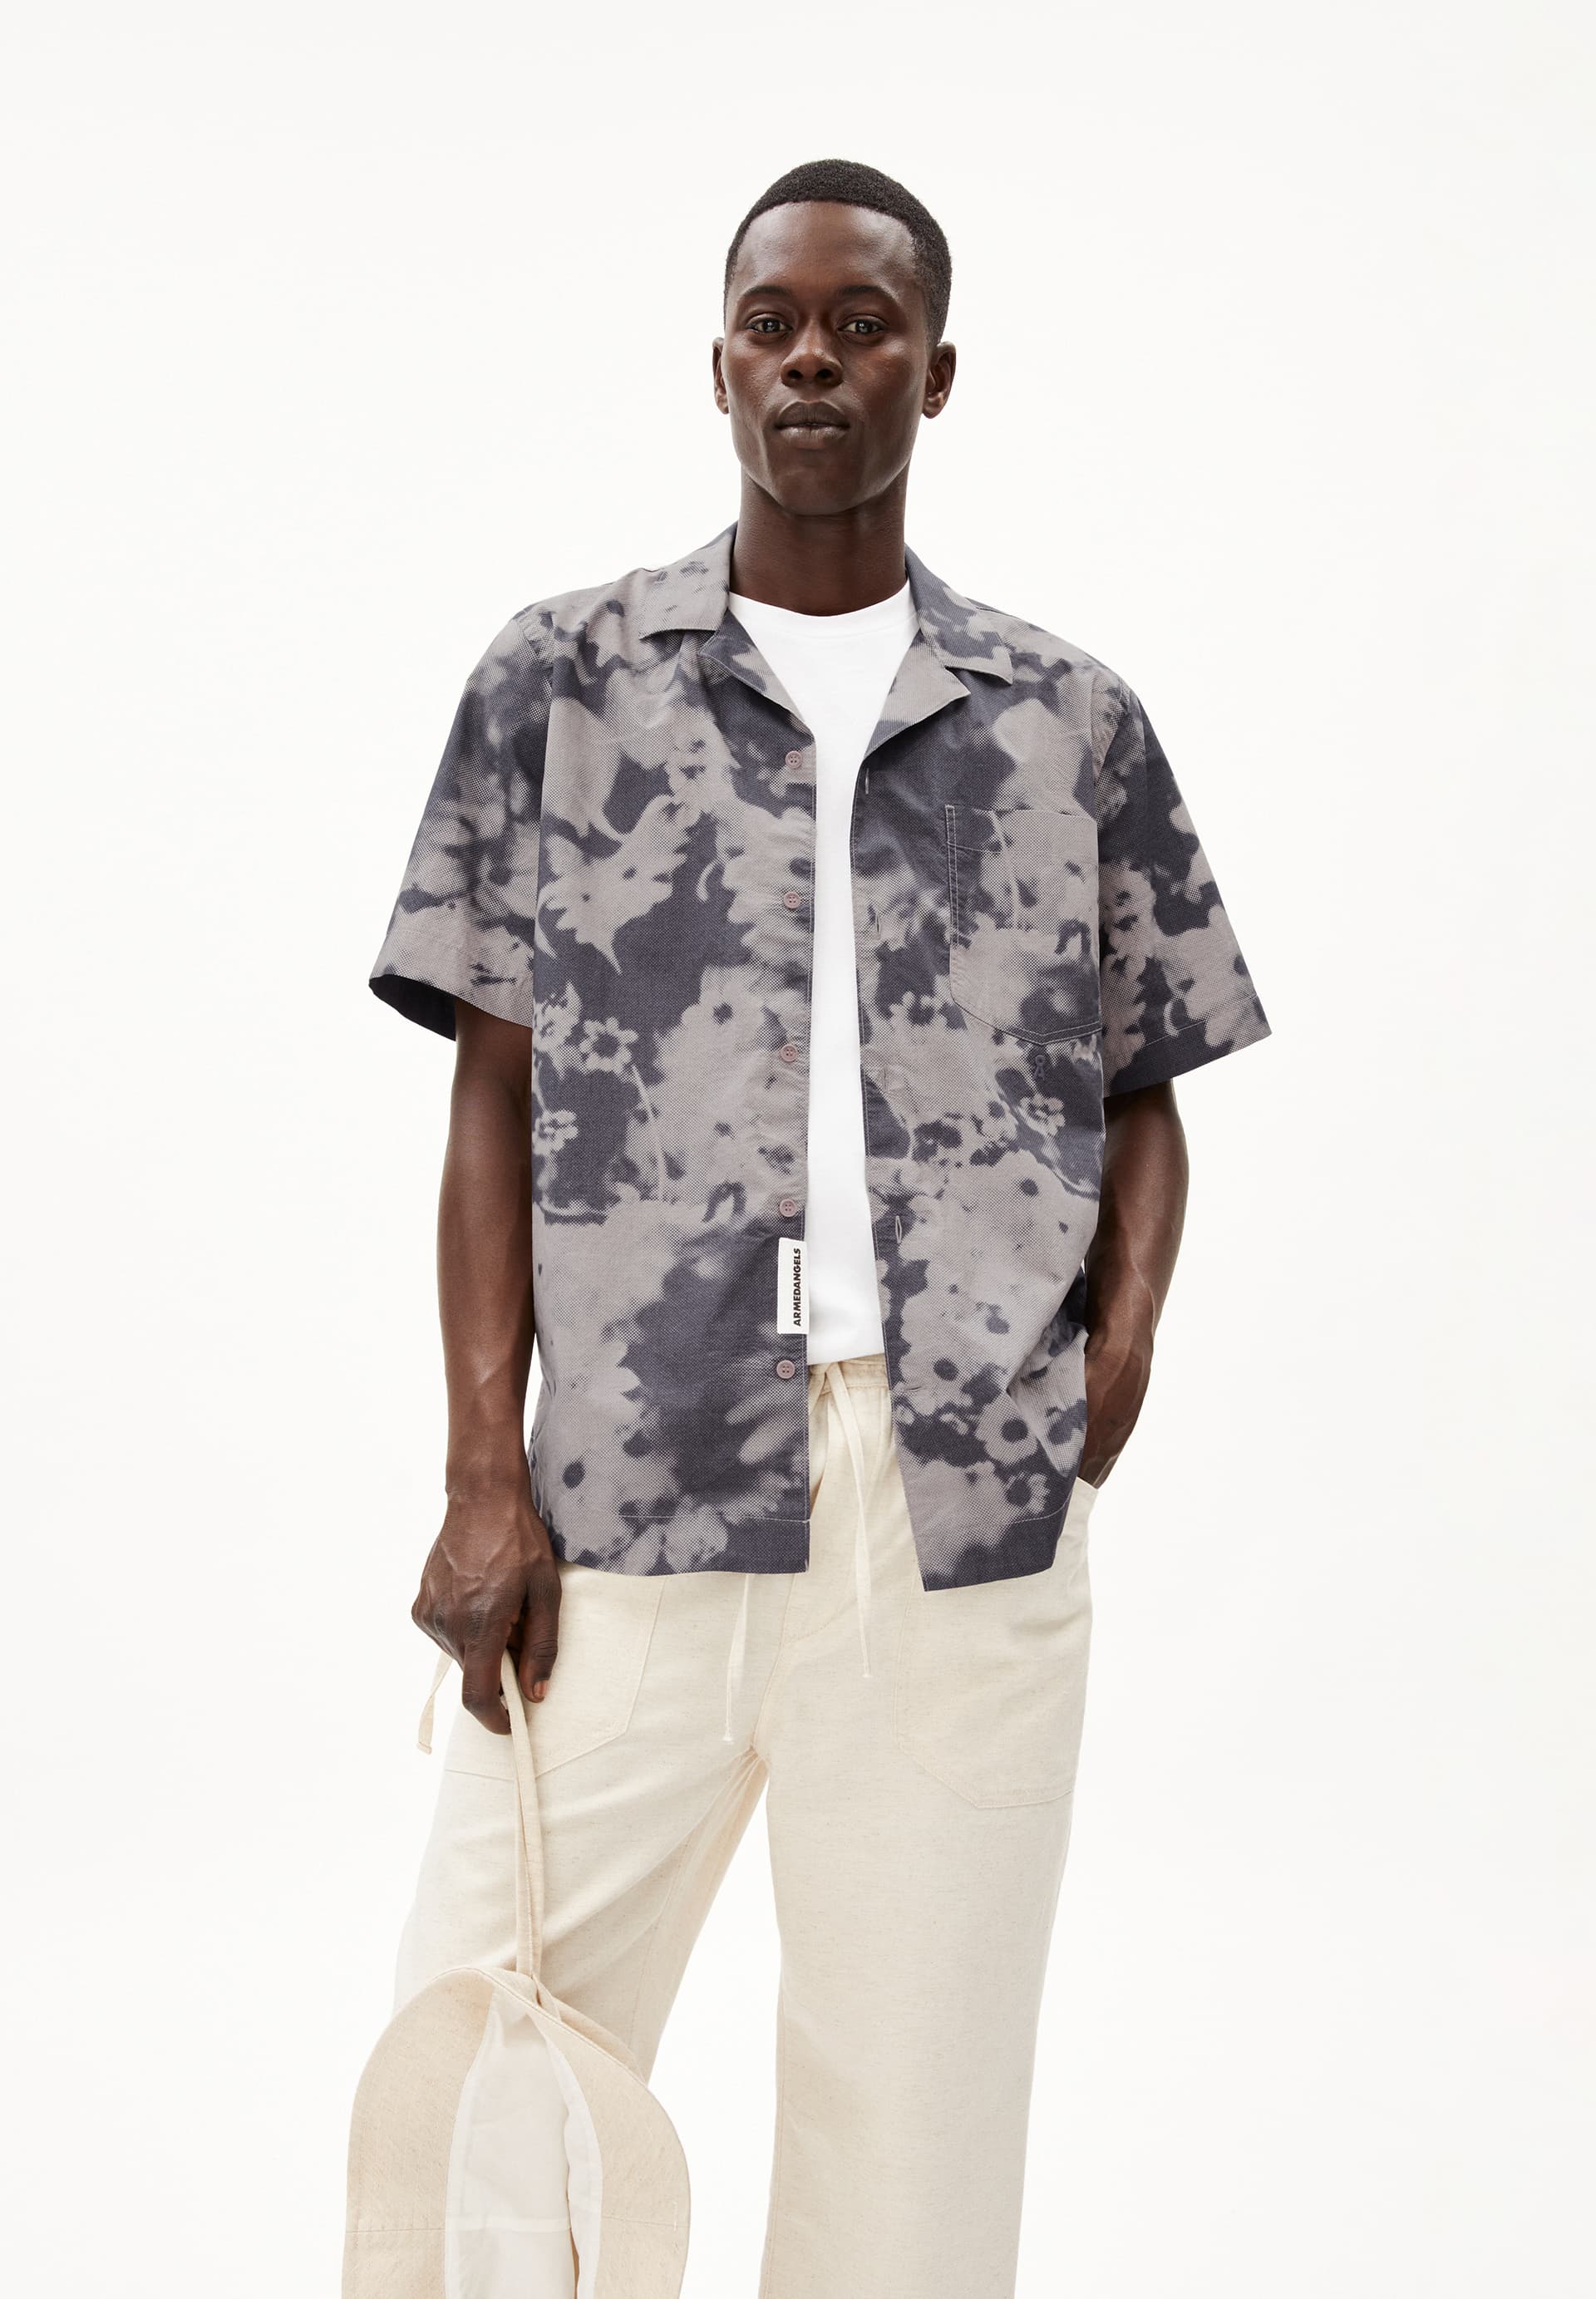 LOVAAR BLOMMAA Shirt Relaxed Fit made of Organic Cotton